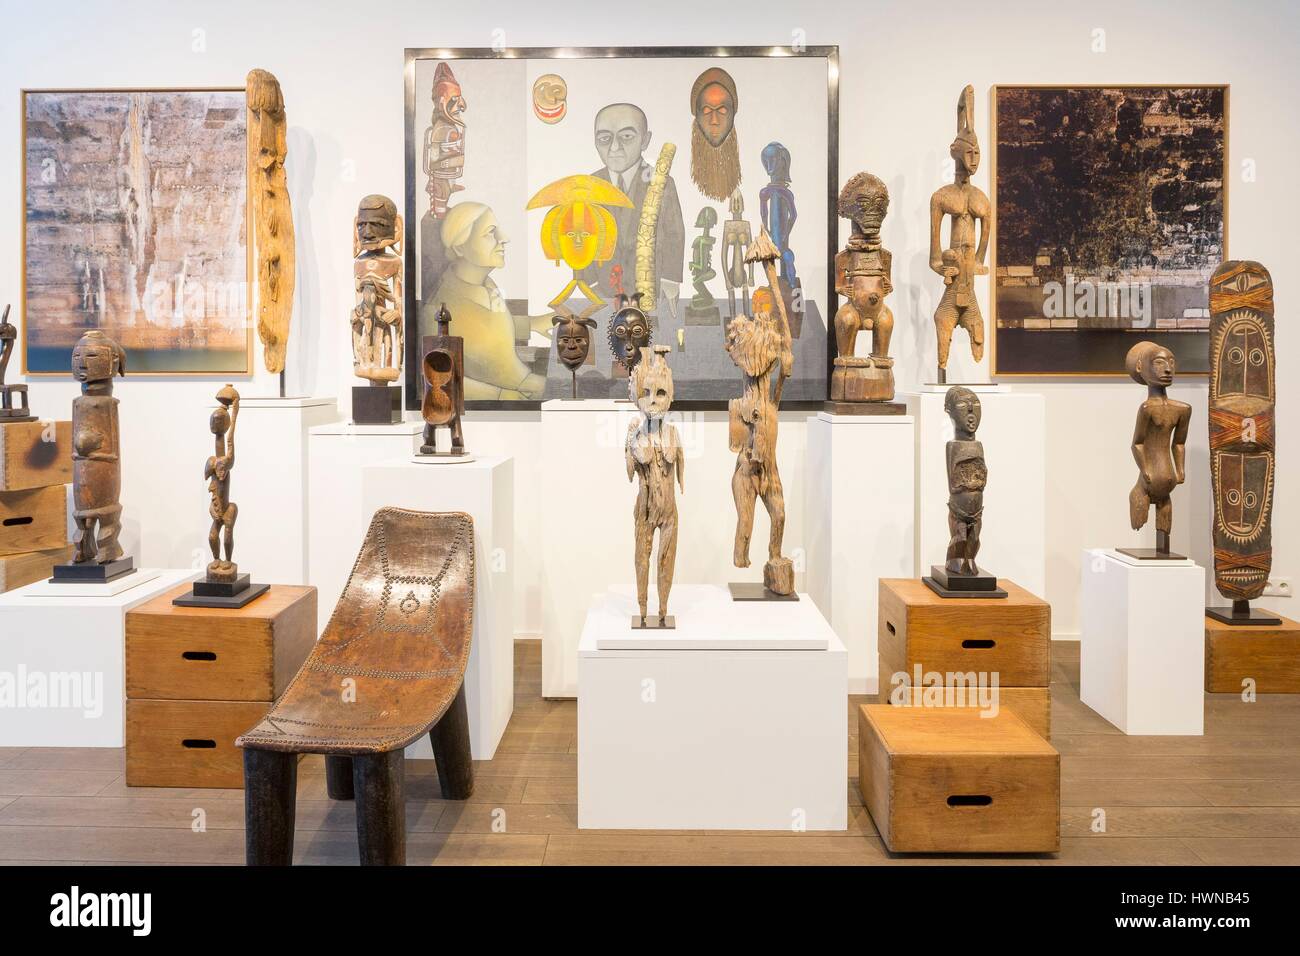 Belgium, Brussels, Ixelles area, Rue du chatelain, Maison Particuliere, private contemporary art center and founded in 2011 by two French collectors Amaury and Myriam de Solages, PAIR (e) exhibition, african art Stock Photo